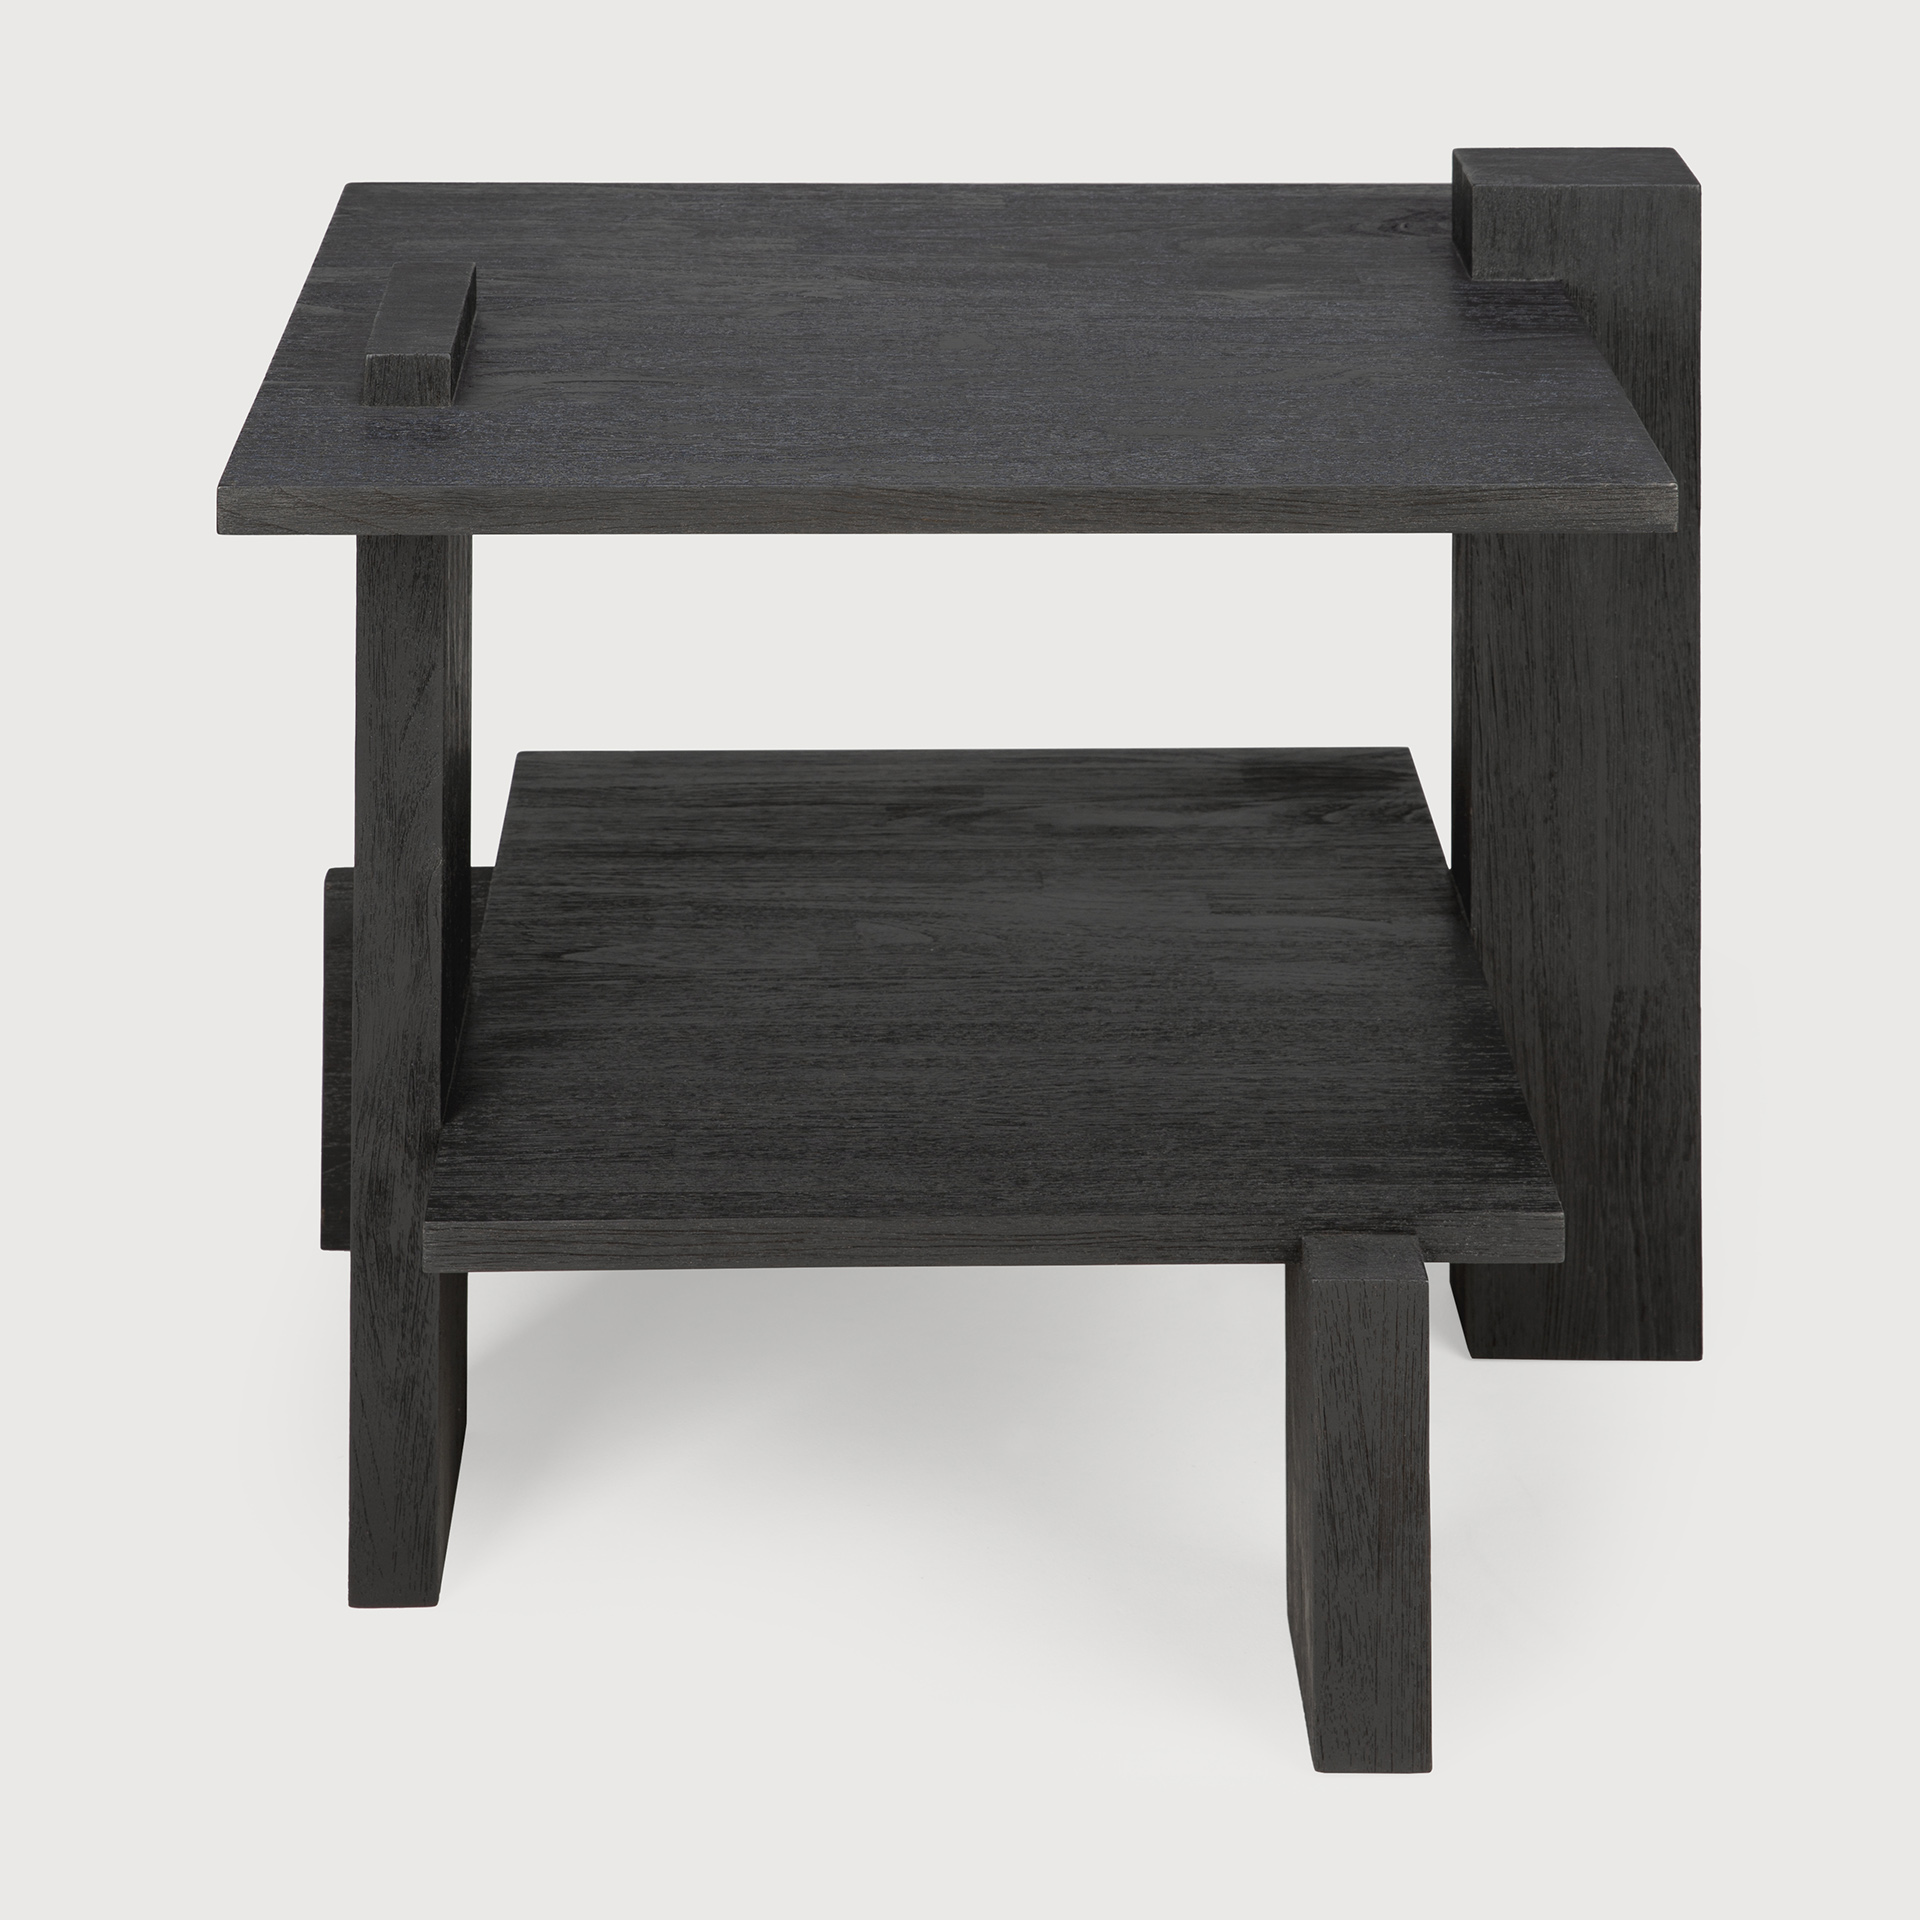 [10120] Abstract side table